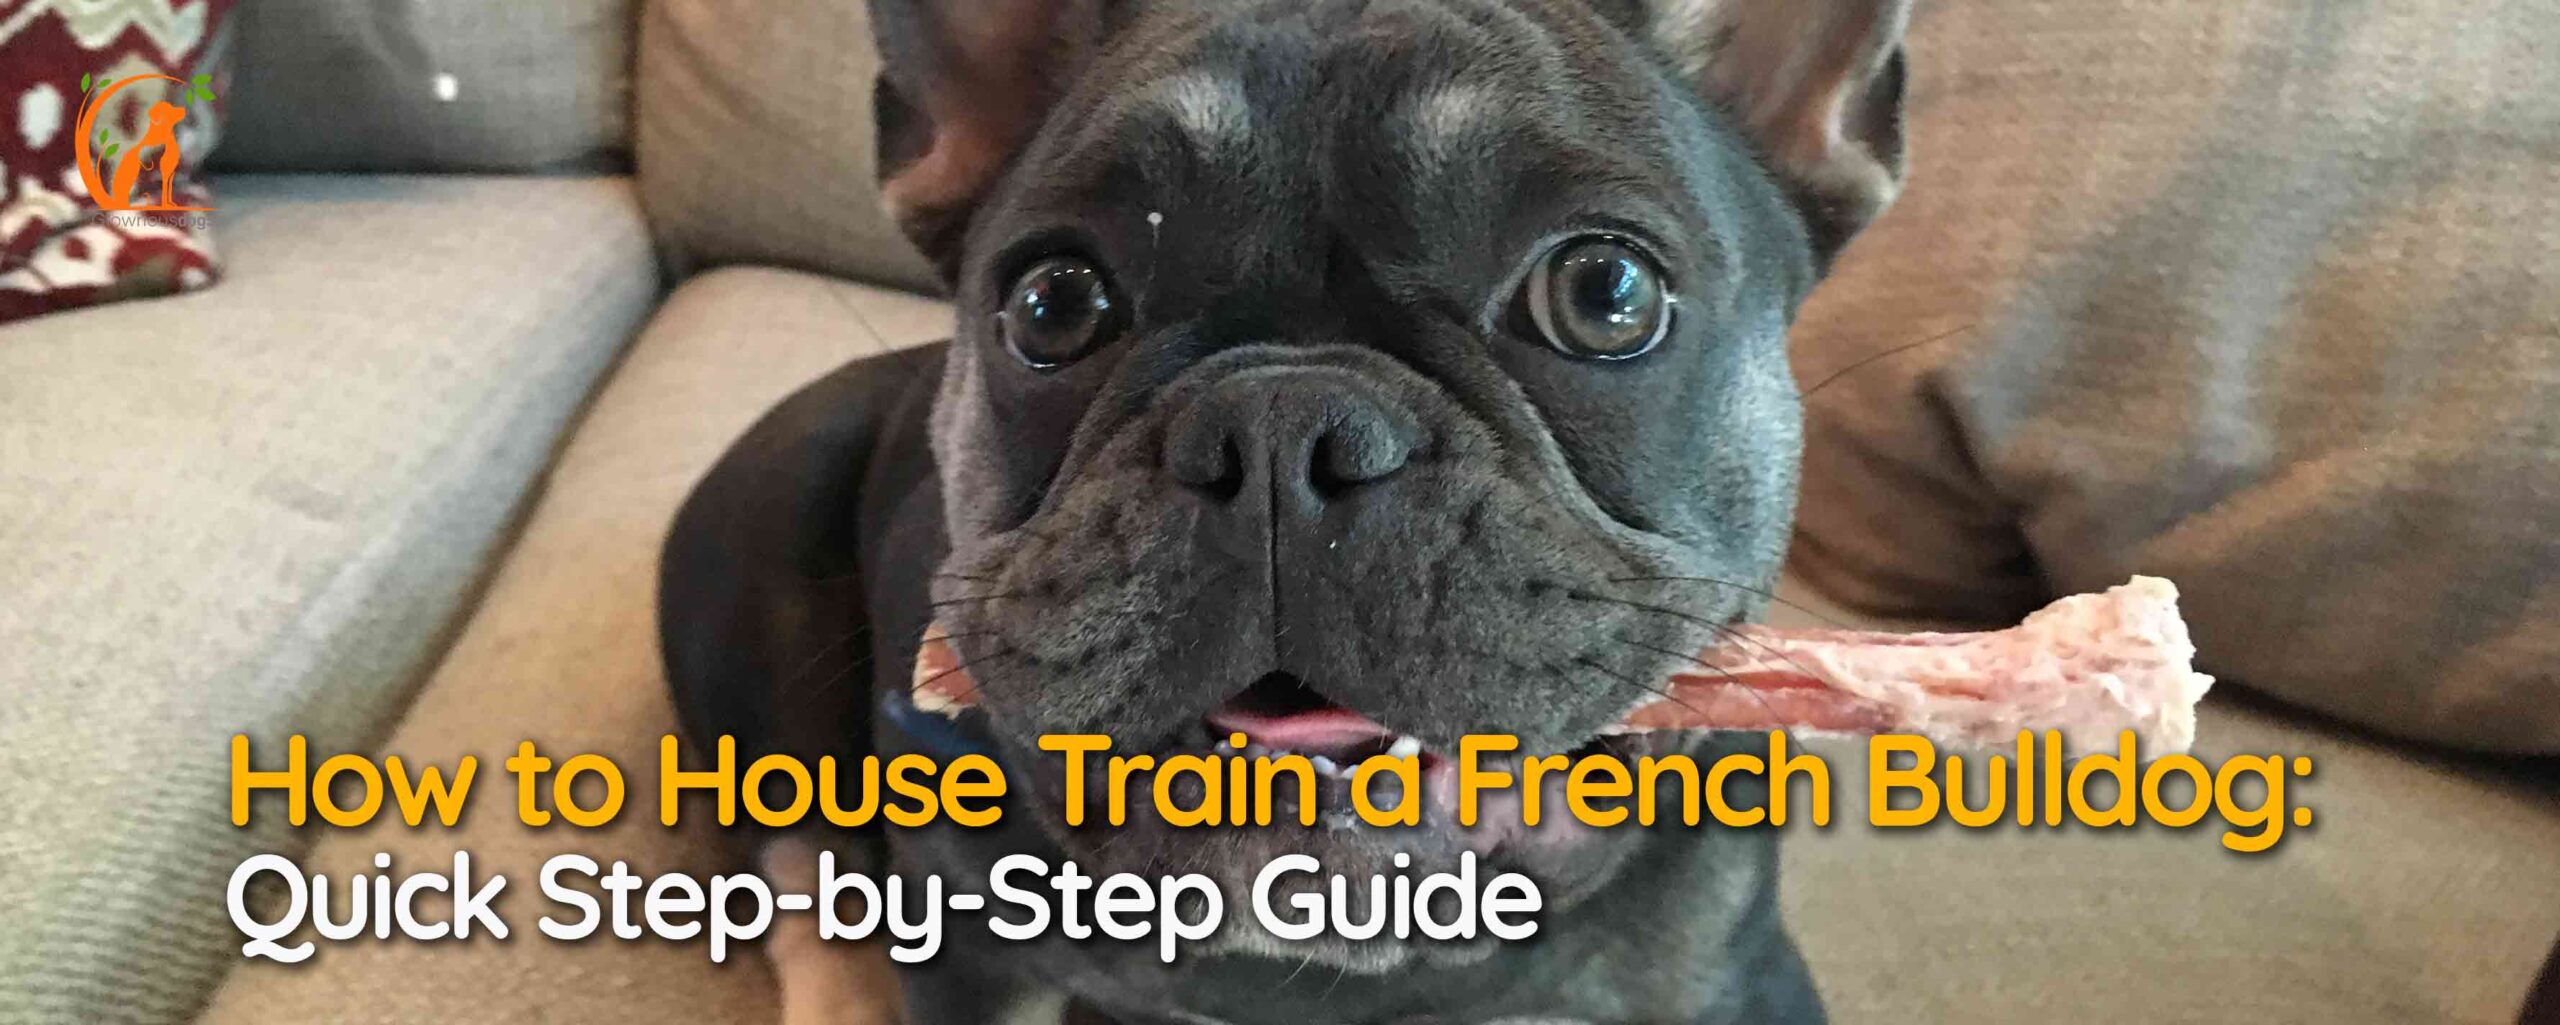 How to House Train a French Bulldog: Quick Step-by-Step Guide